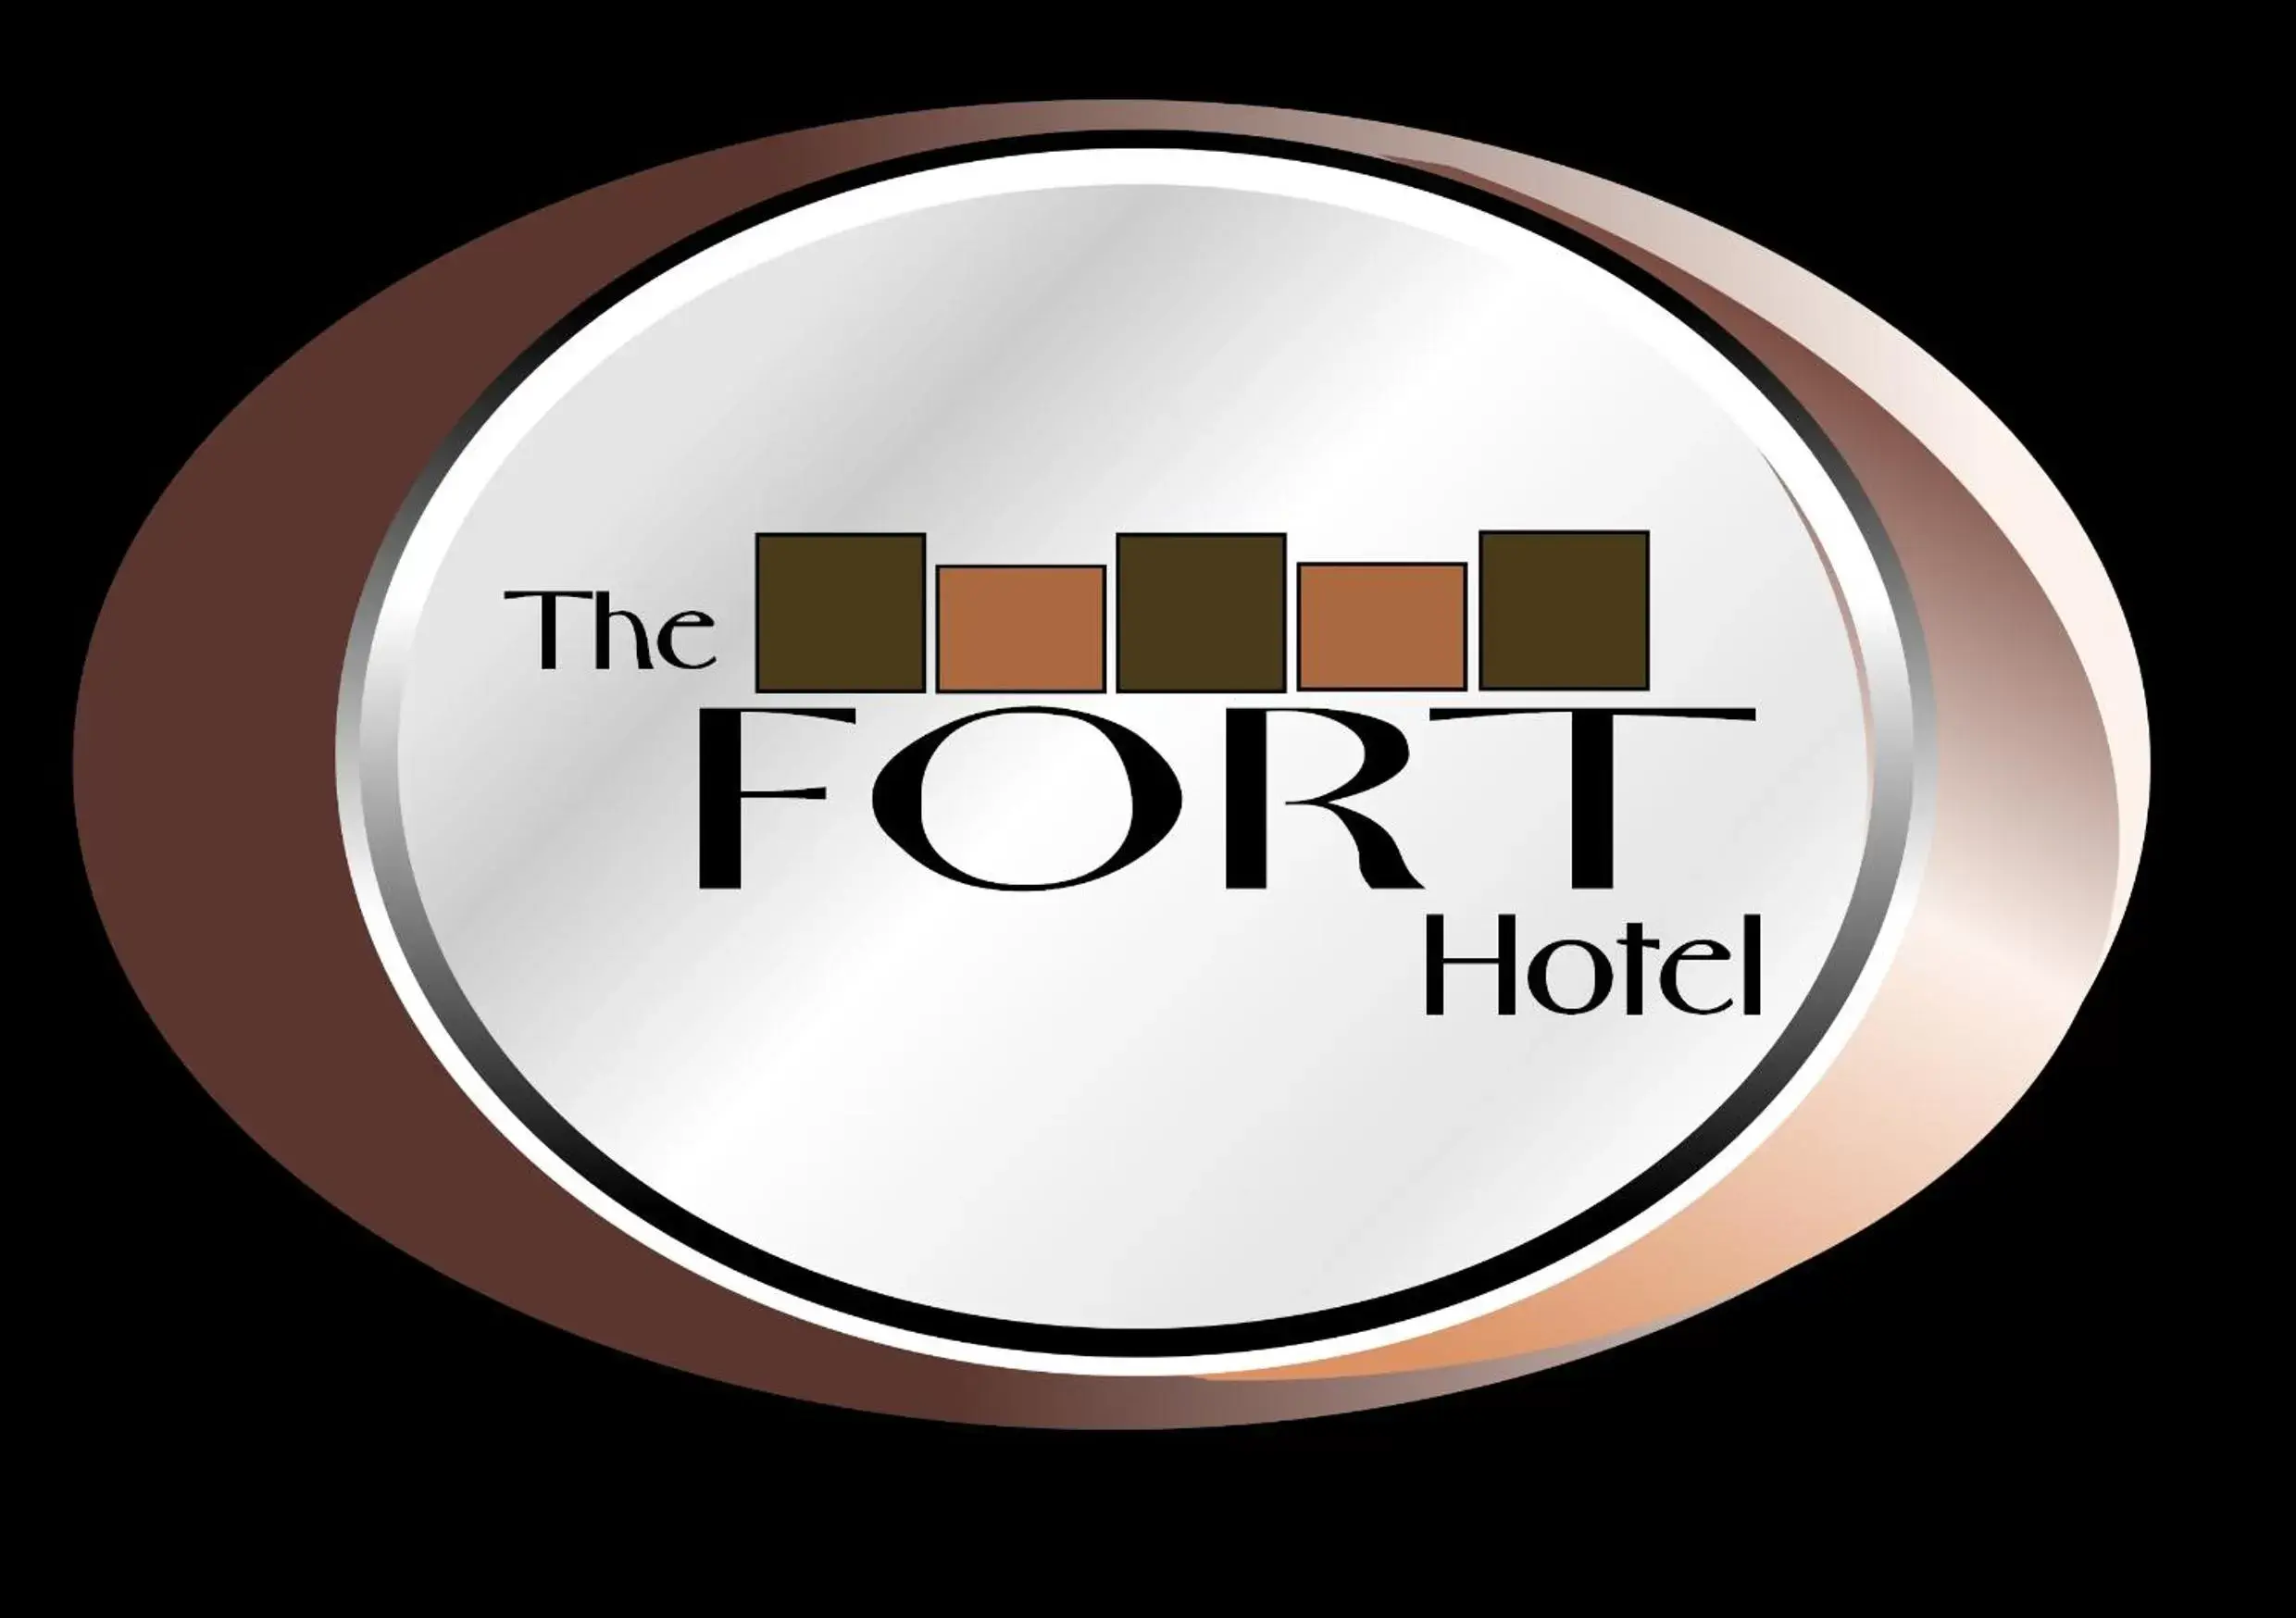 Property logo or sign in The Fort Hotel